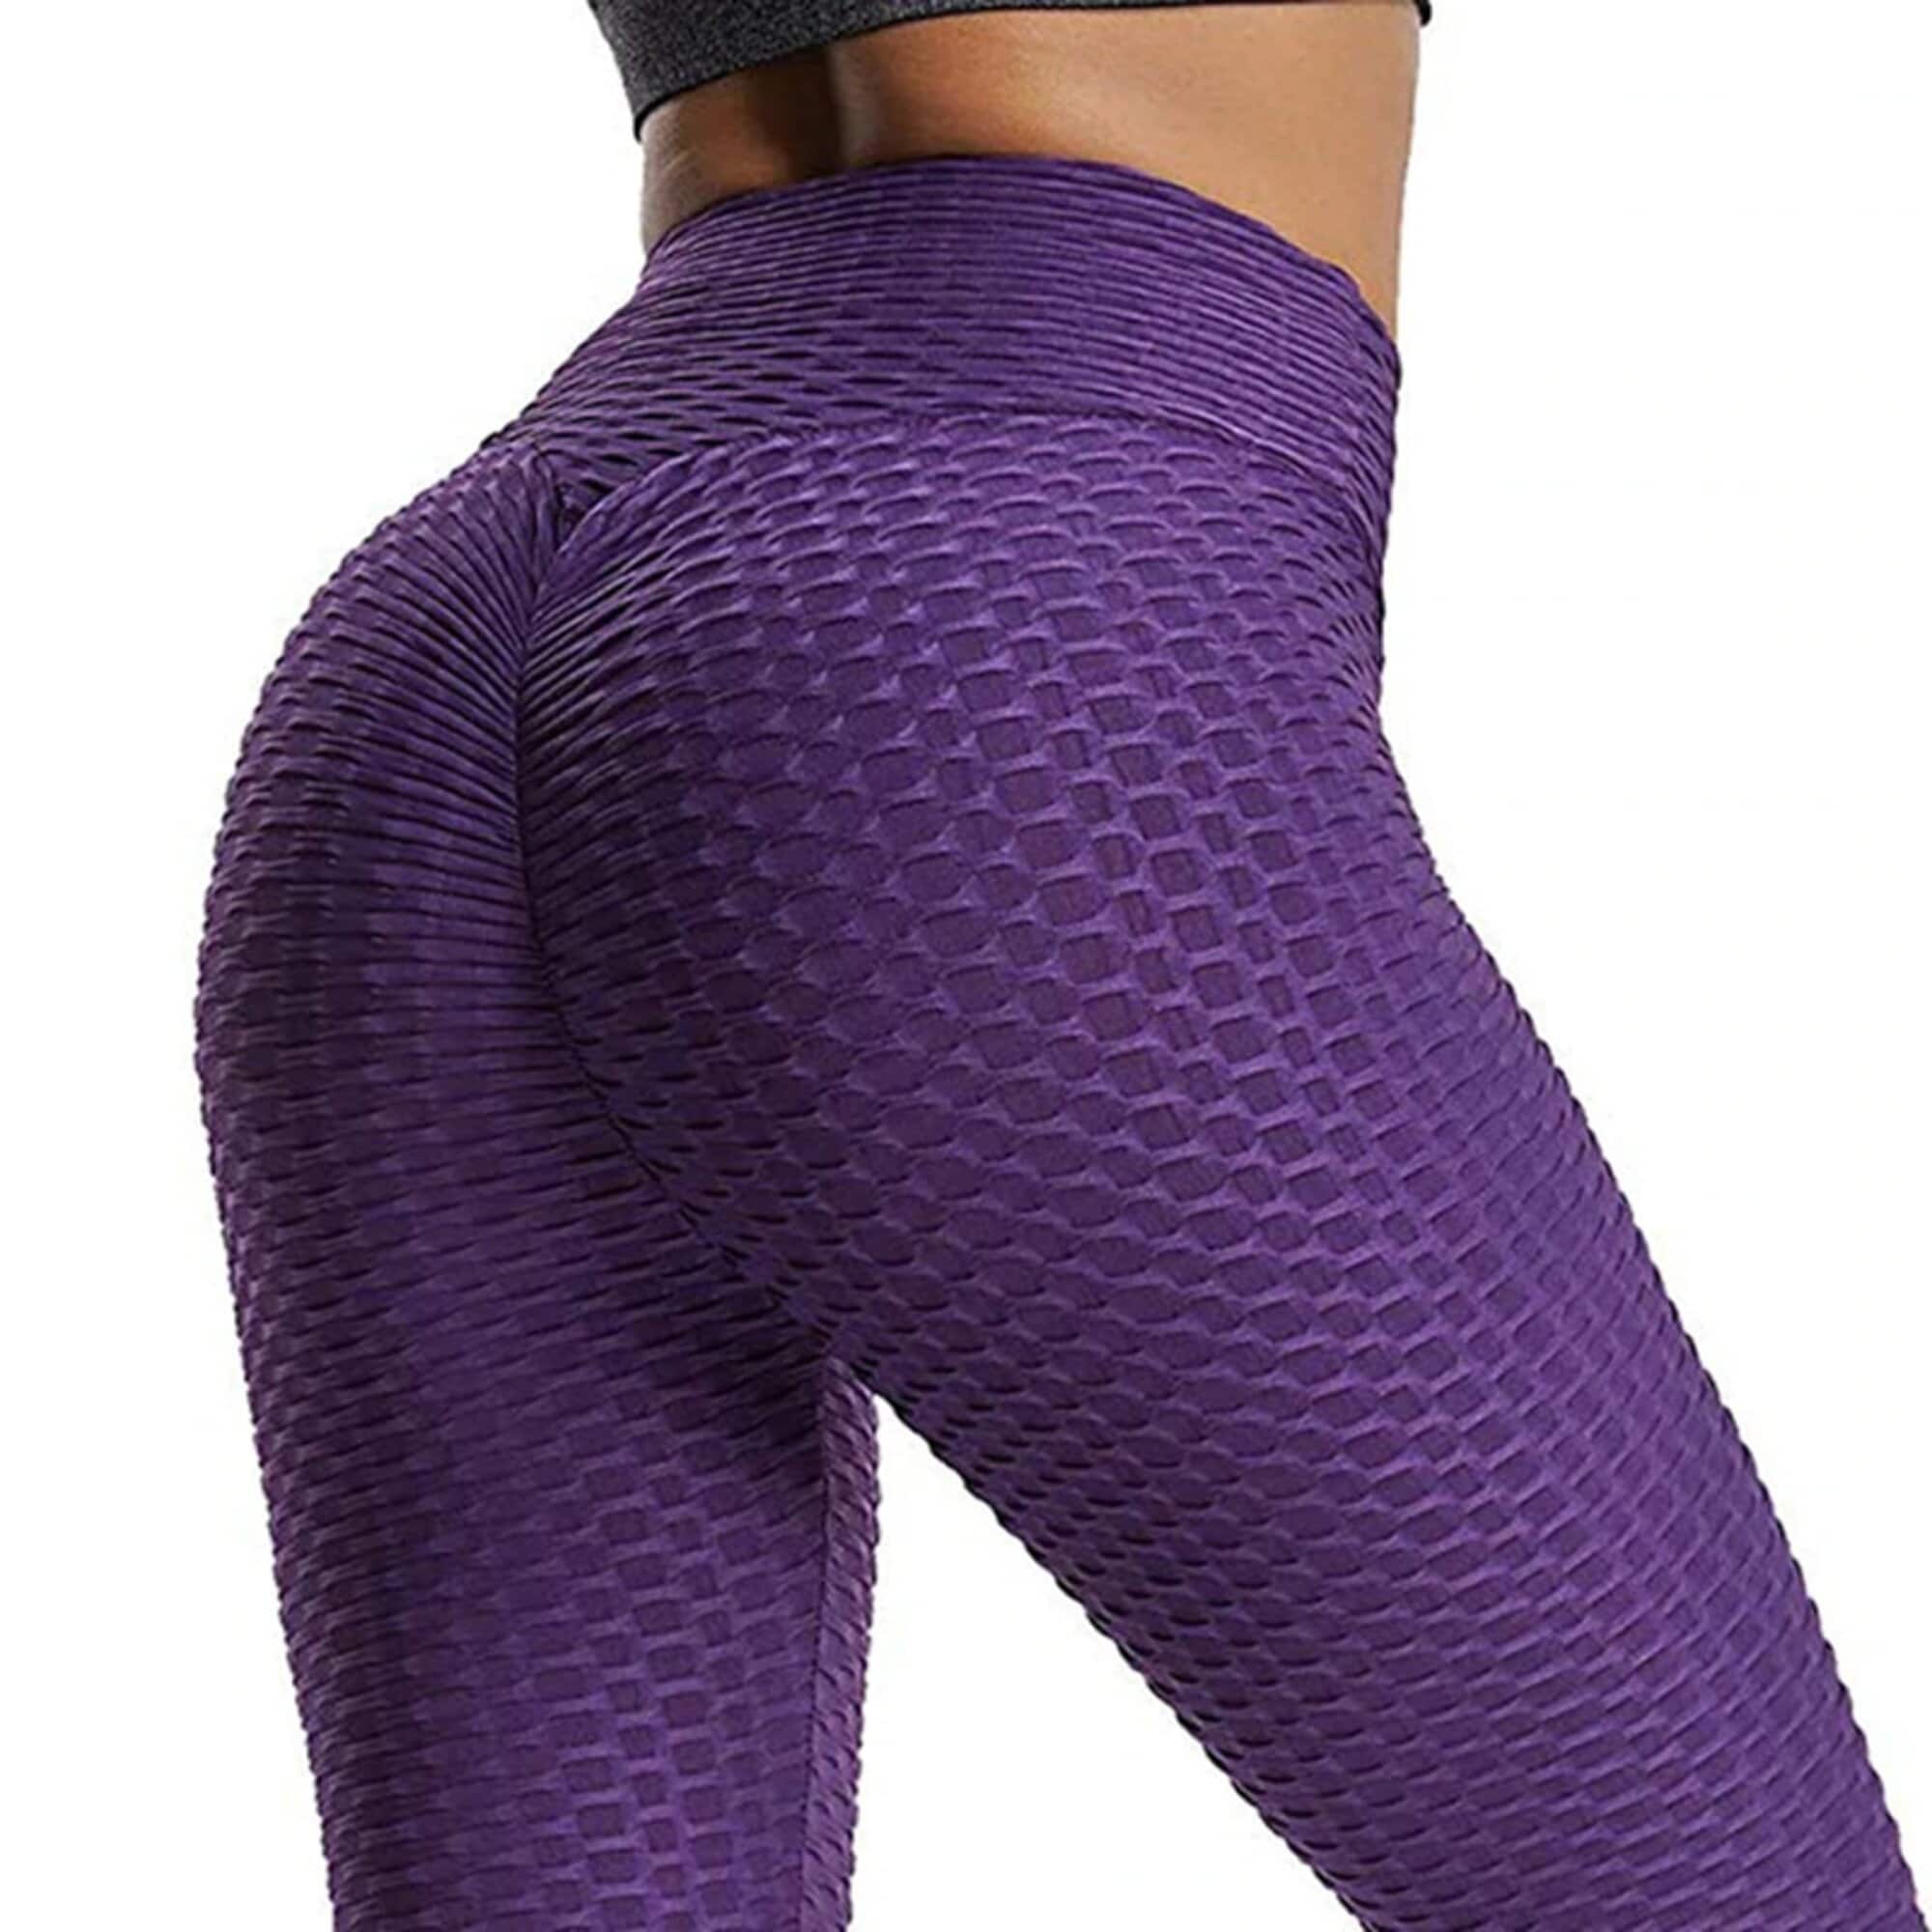 Amazon.com: OooH Popular Women Workout Leggings |Butt Lifting High Waist  Yoga Pants Anti-Cellulite Shaper Wear Athleisure Active Slimming :  Clothing, Shoes & Jewelry